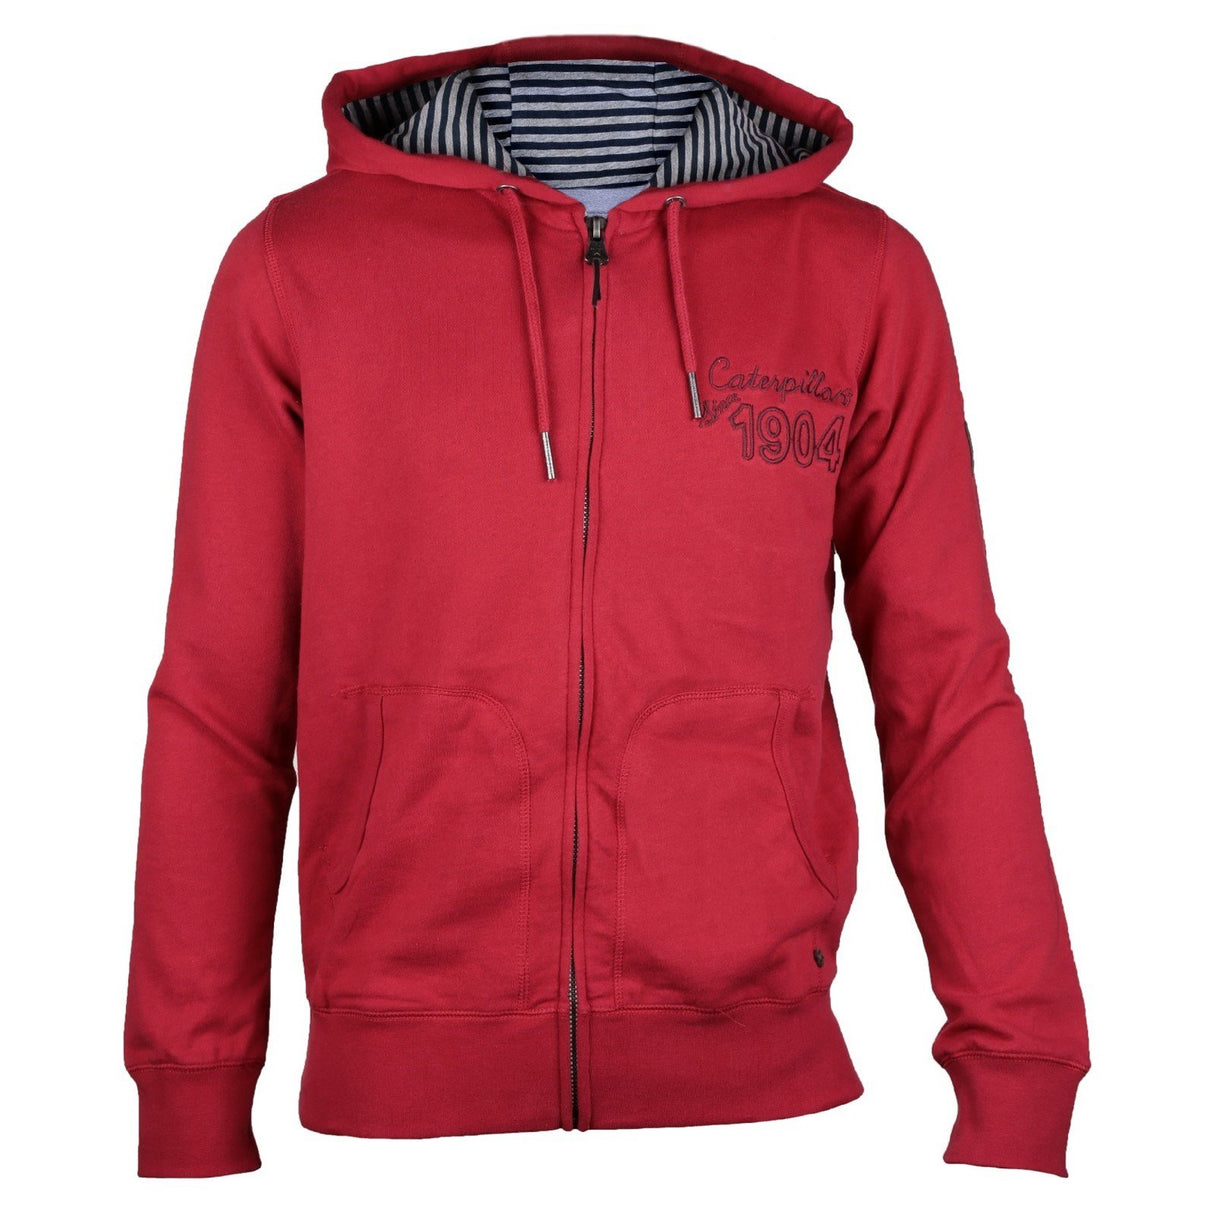 CAT Lifestyle 2910013 Since 1904 Hoodie